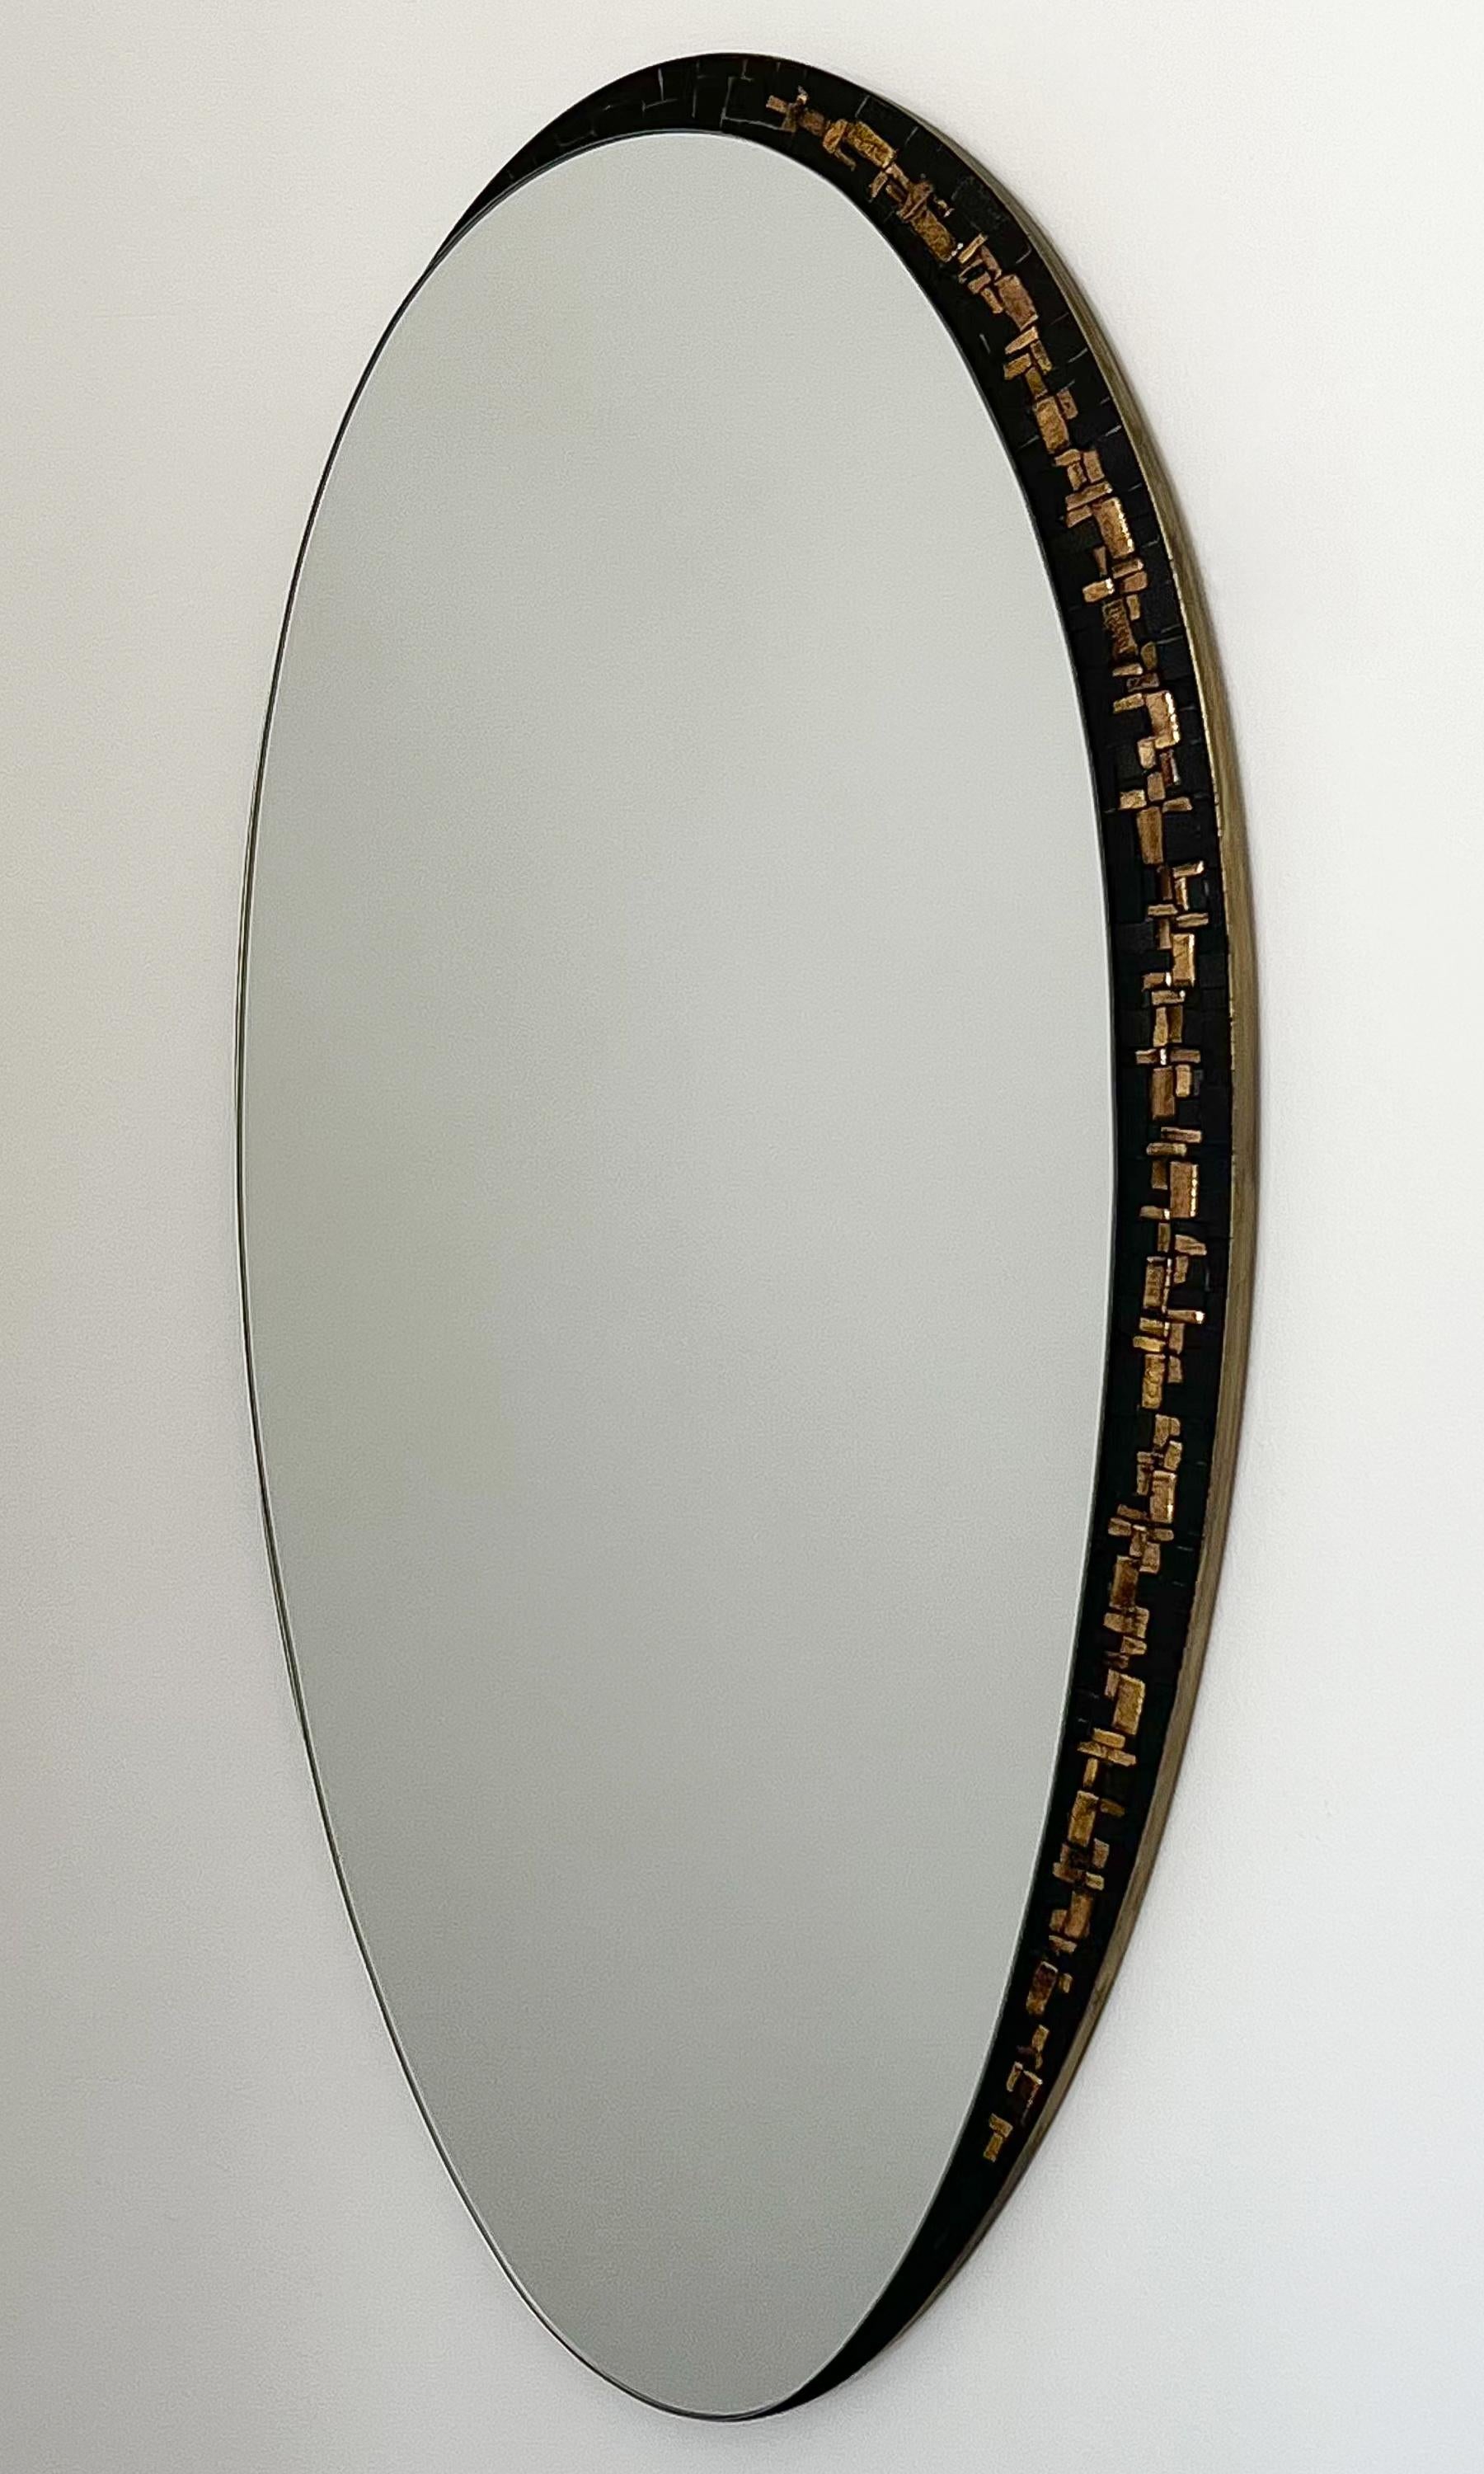 Berthold Müller-Oerlinghausen black and gold mosaic tiled oval wall mirror, Germany circa 1950s. Oval mirror with a crescent of matte black and gold metallic mosaic tiles on the right side. Asymmetric and modern in design. Entire mirror is framed in